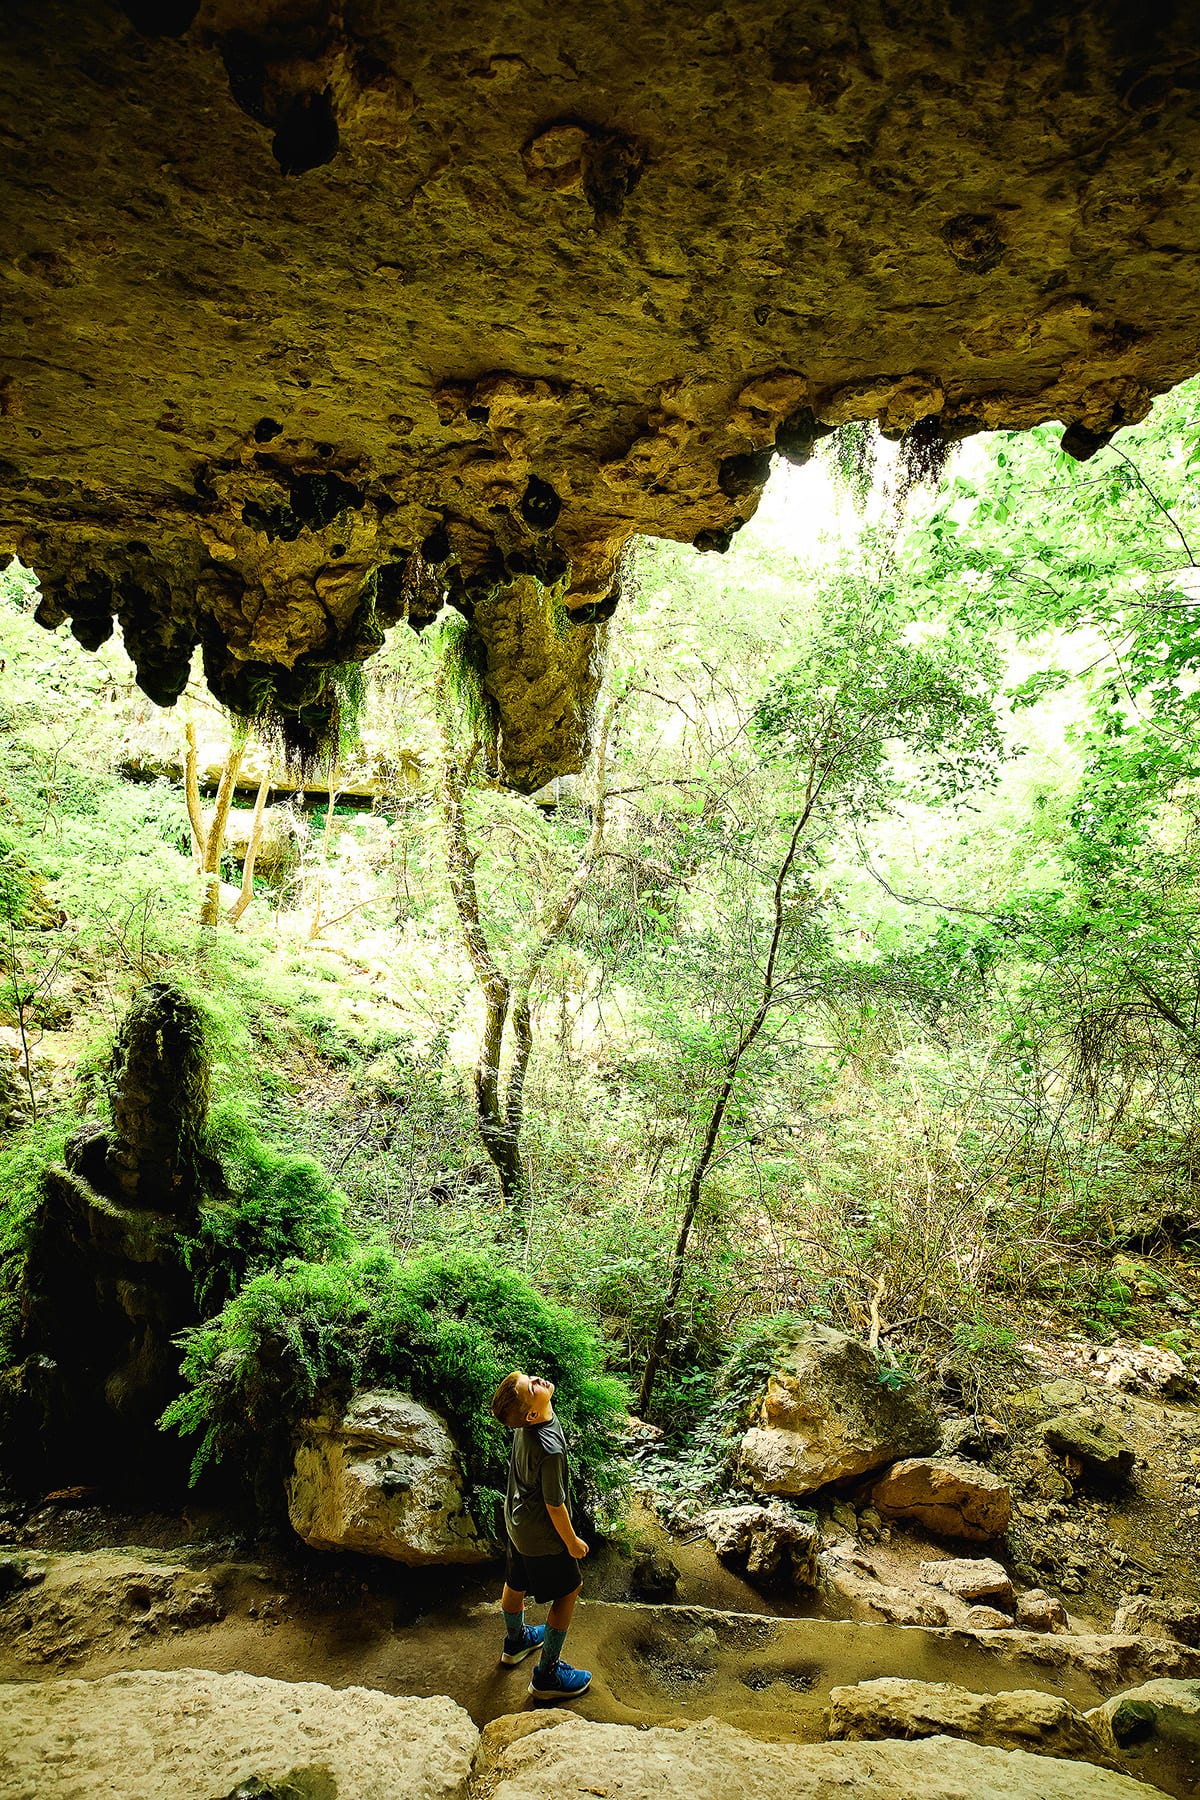 Reimer's Ranch climber's cavern Dripping Springs, Texas